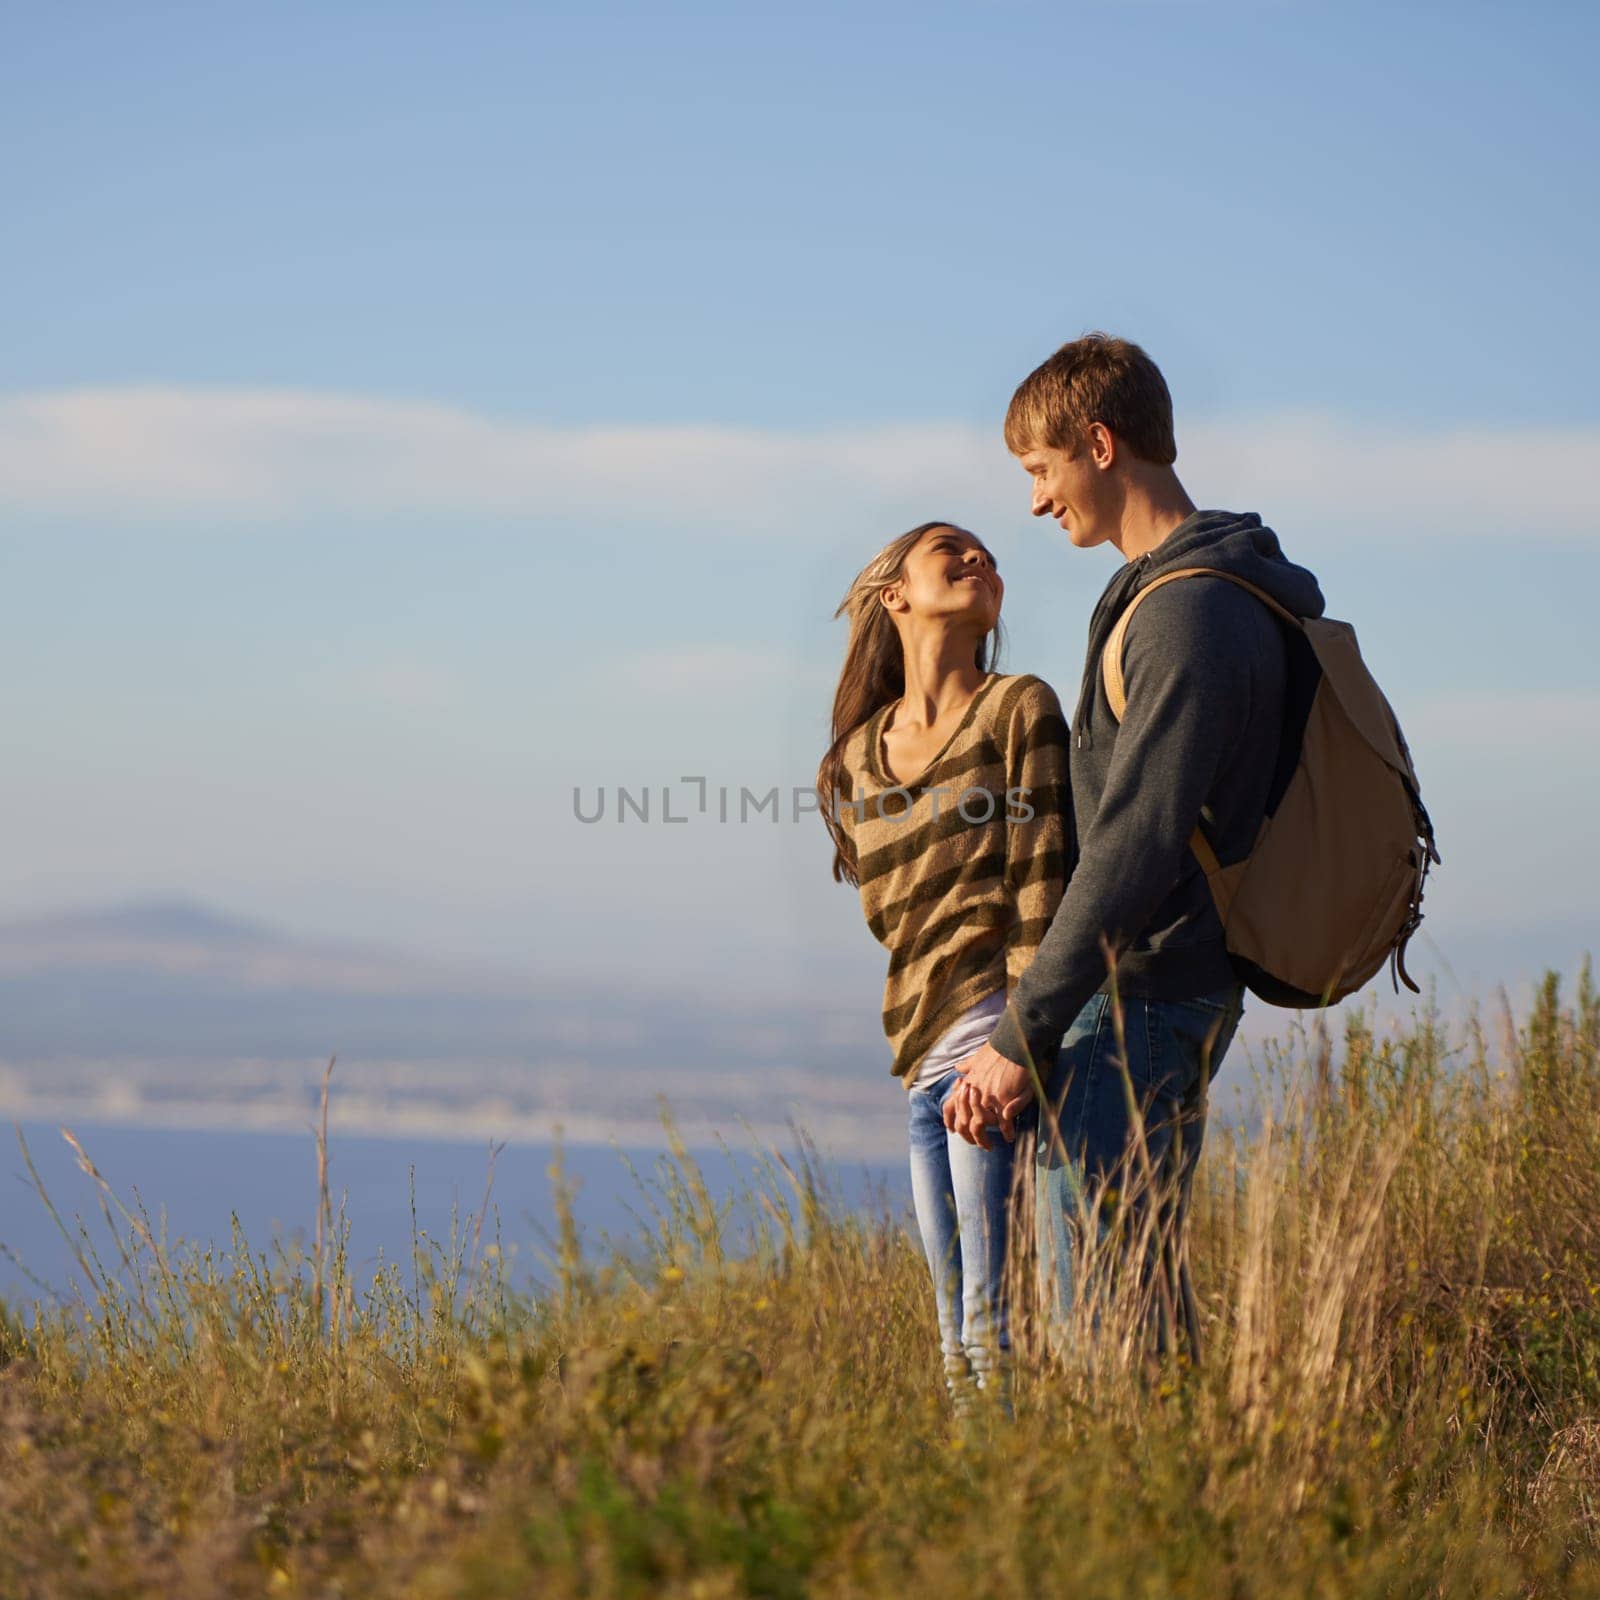 Smile, hiking and couple holding hands in nature for holiday, travel or adventure outdoor together. Love, man and happy woman trekking in the countryside for bonding on vacation, journey and mockup.